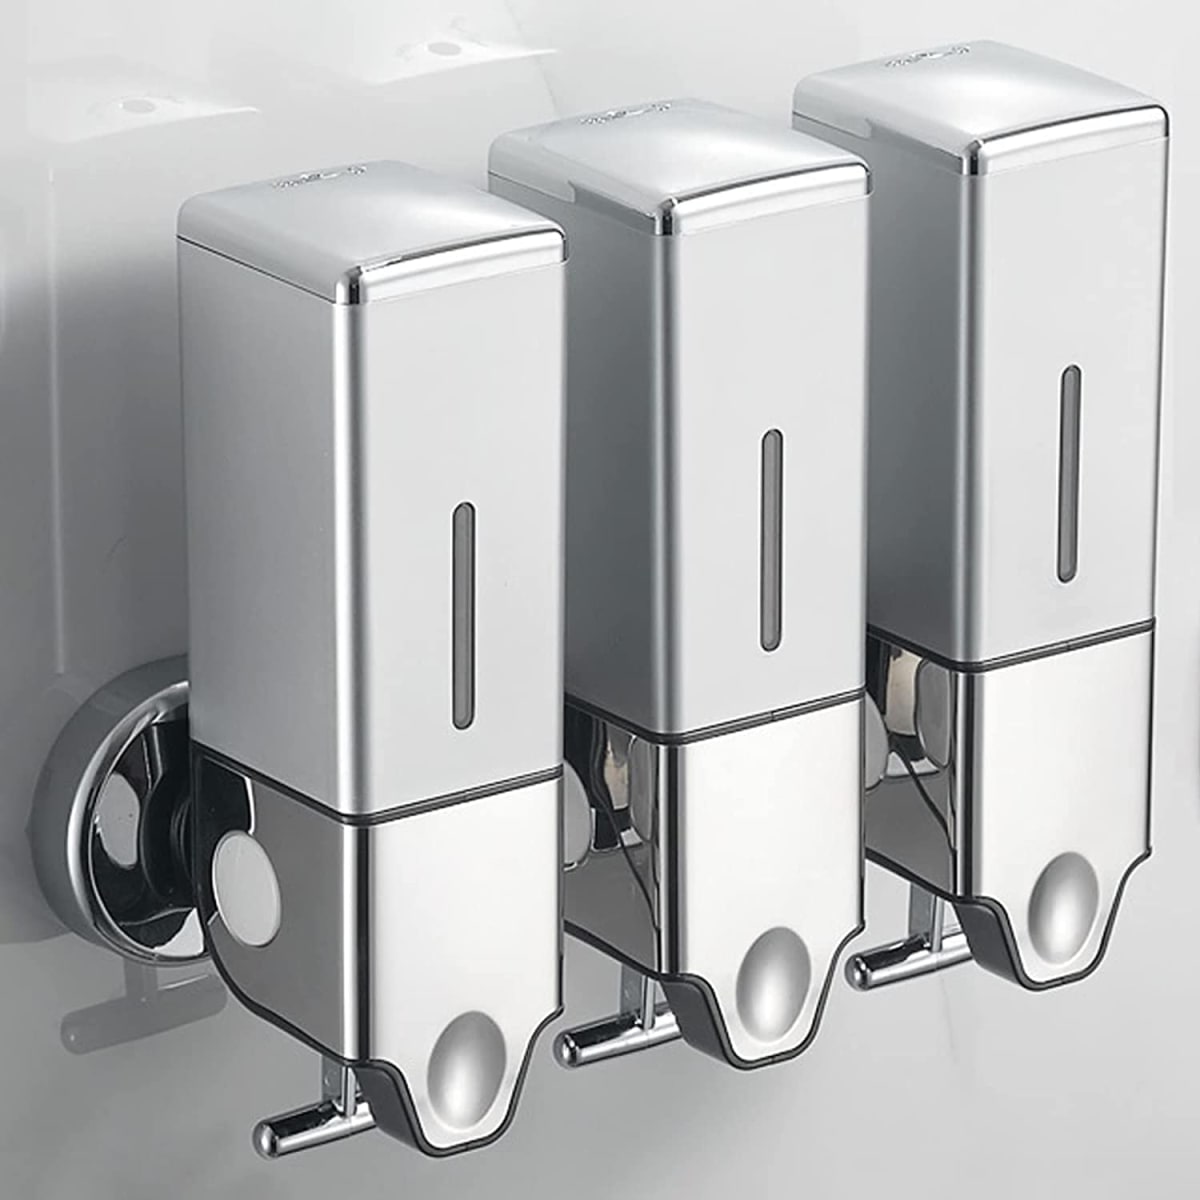 3 in 1 Chamber Shampoo and Soap Dispensers